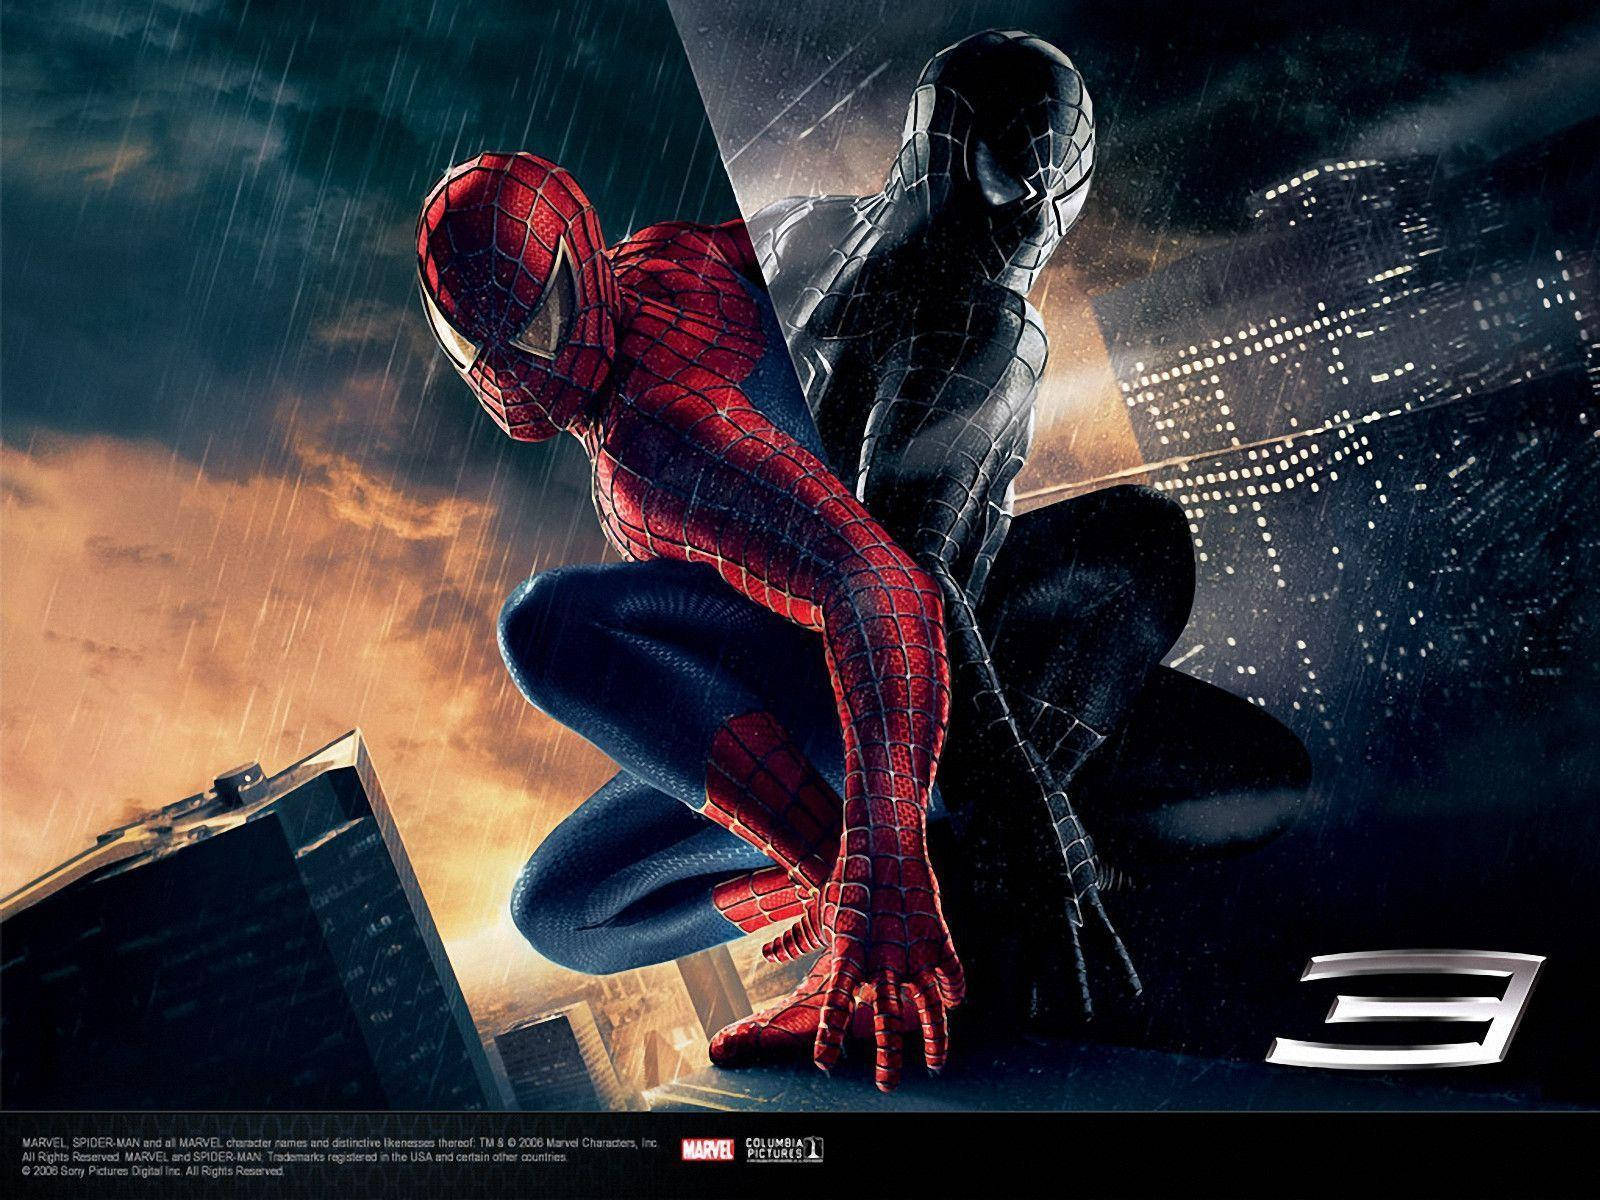 Spiderman red and black, enemy on a dark city background.